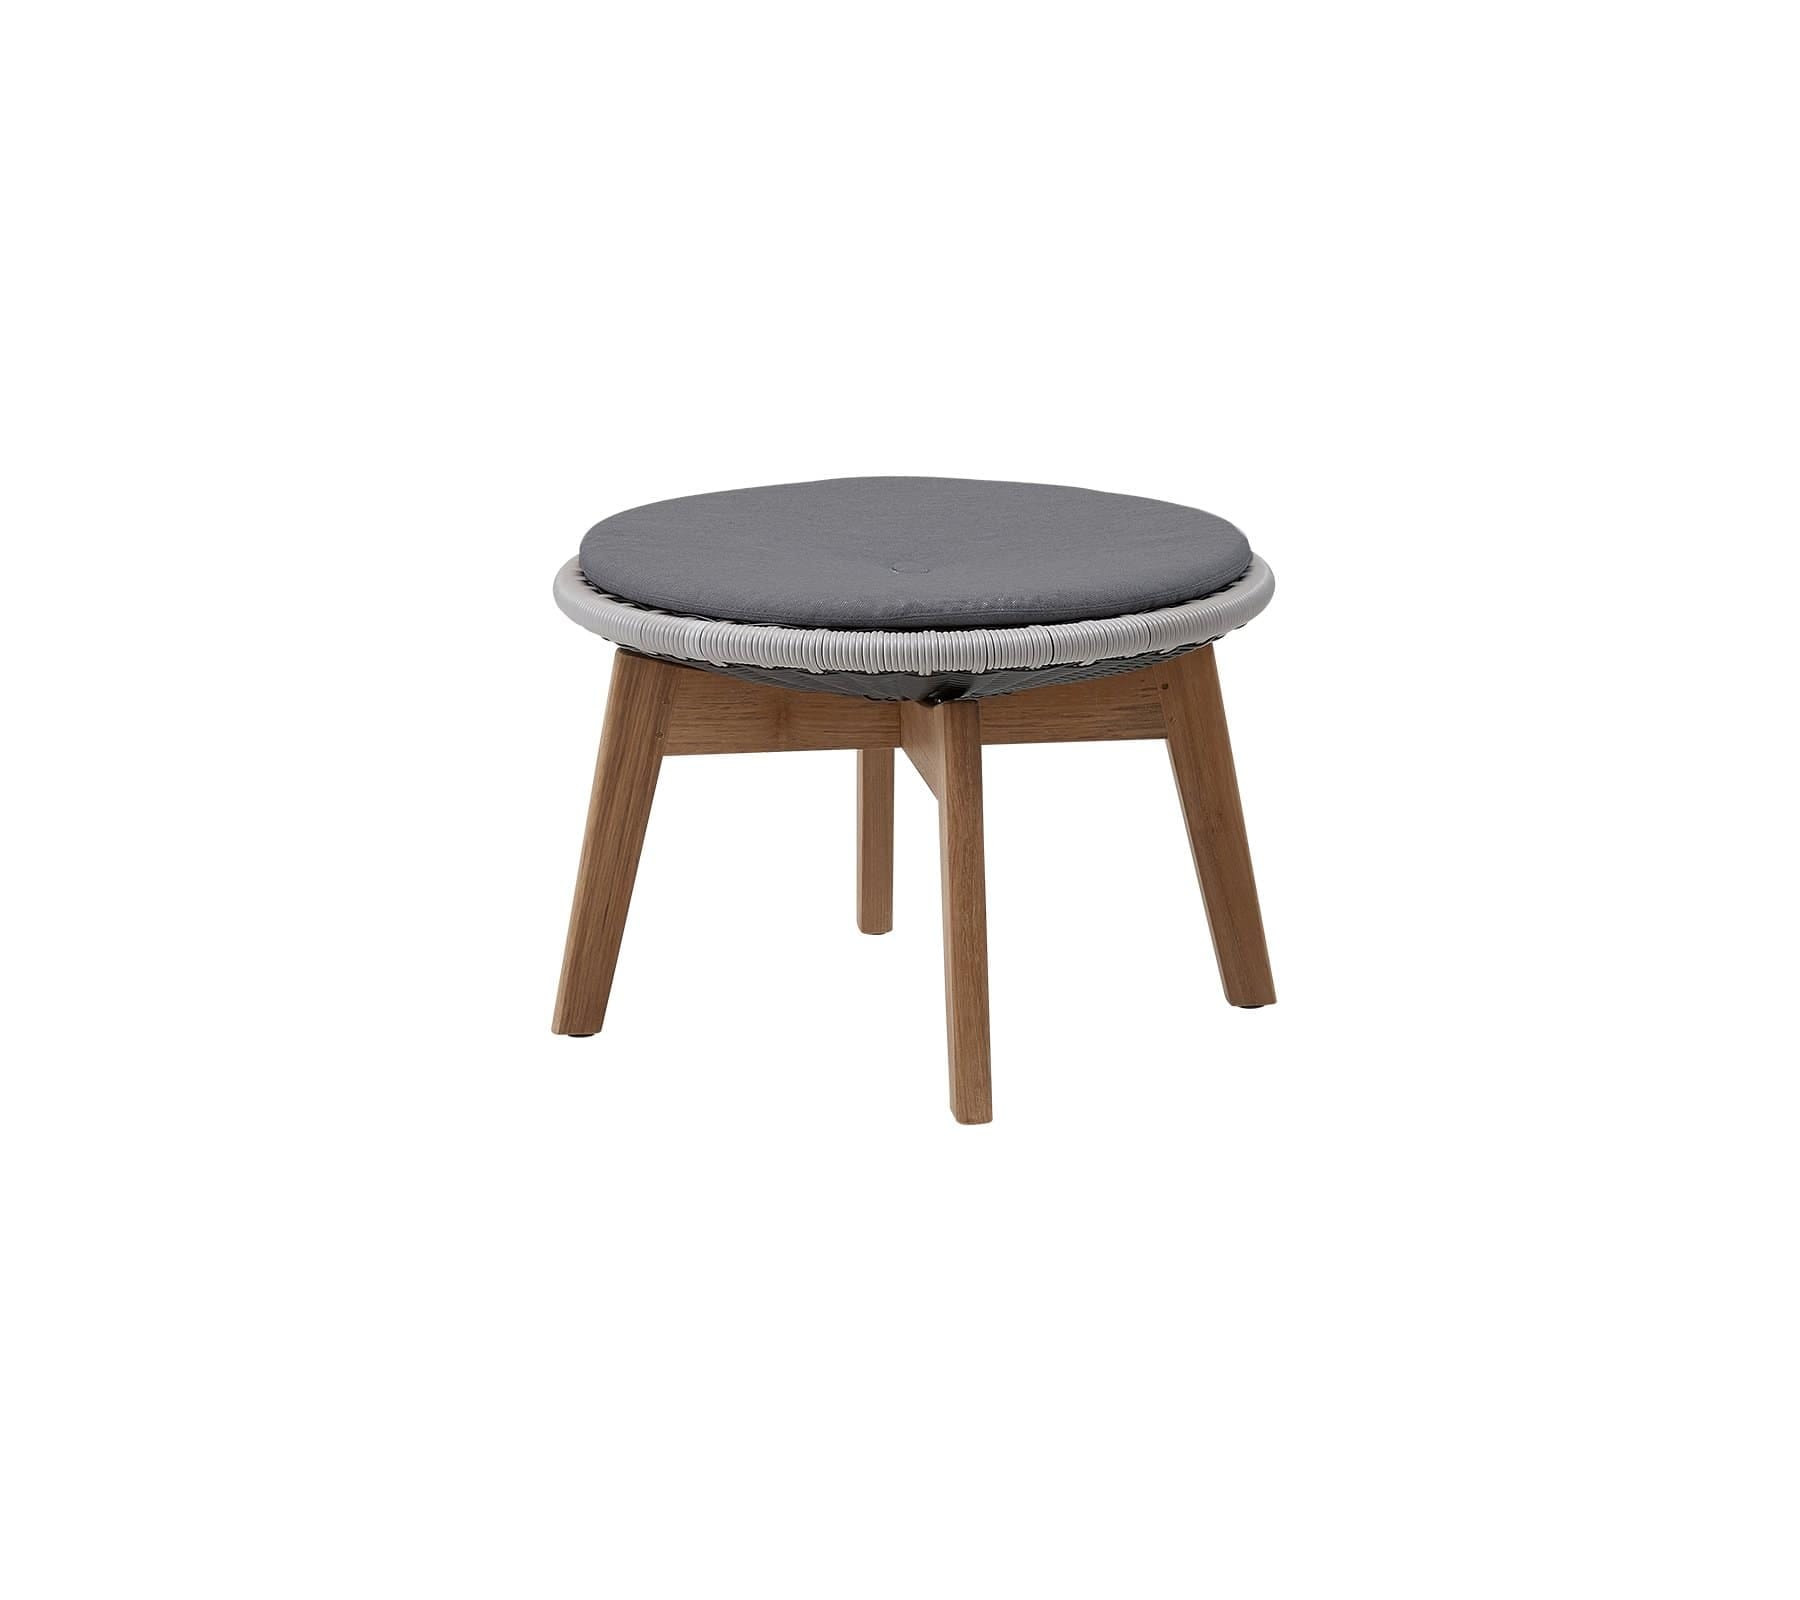  Boxhill's Peacock grey weave outdoor footstool/side table with teak legs with grey cushion on white background